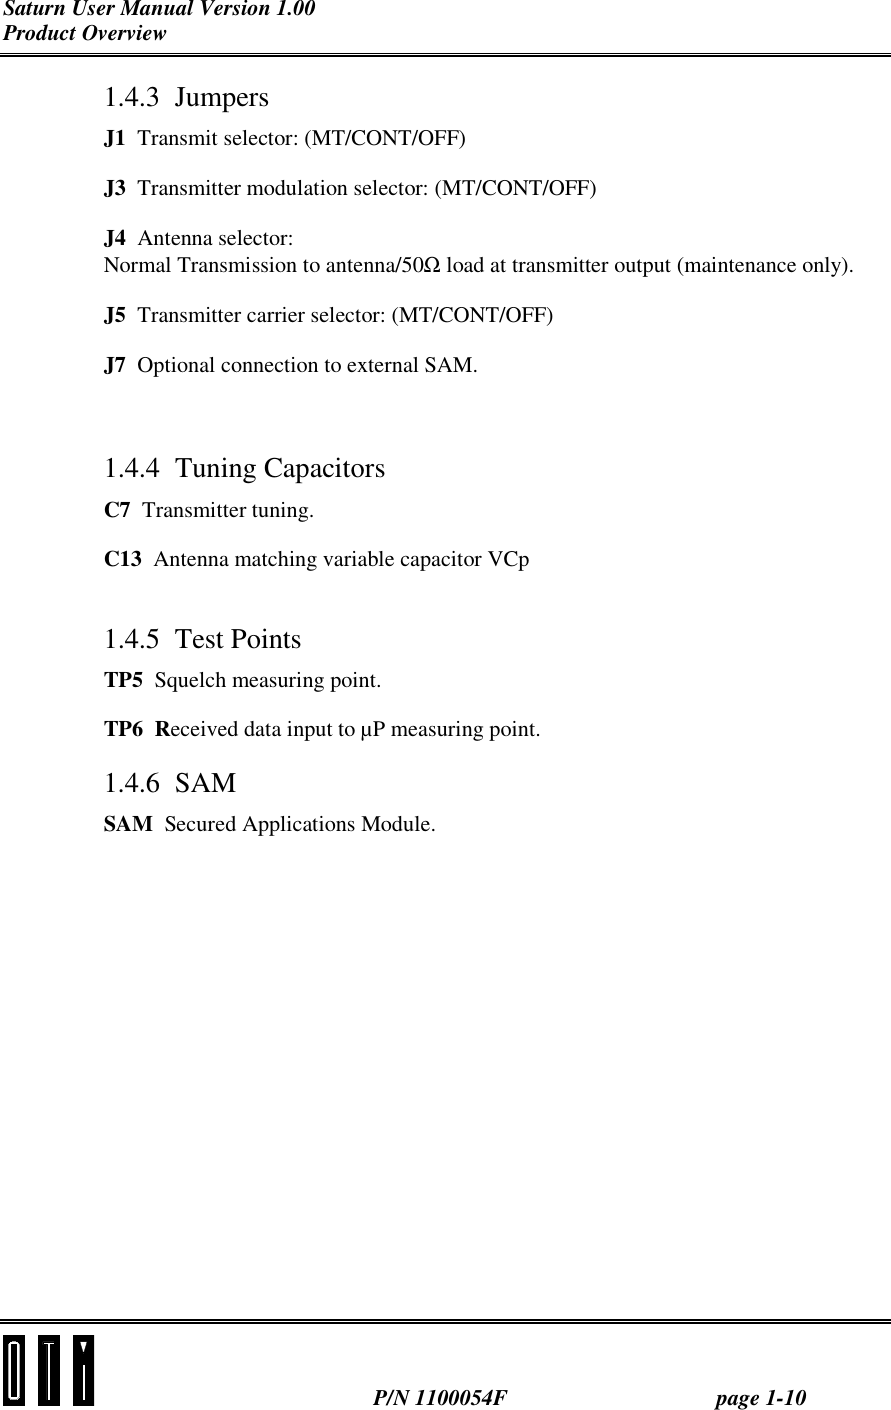 Saturn User Manual Version 1.00 Product Overview   P/N 1100054F  page 1-10 1.4.3 Jumpers J1  Transmit selector: (MT/CONT/OFF) J3  Transmitter modulation selector: (MT/CONT/OFF) J4  Antenna selector: Normal Transmission to antenna/50Ω load at transmitter output (maintenance only). J5  Transmitter carrier selector: (MT/CONT/OFF) J7  Optional connection to external SAM.  1.4.4 Tuning Capacitors C7  Transmitter tuning. C13  Antenna matching variable capacitor VCp  1.4.5 Test Points TP5  Squelch measuring point. TP6  Received data input to µP measuring point. 1.4.6 SAM SAM  Secured Applications Module. 